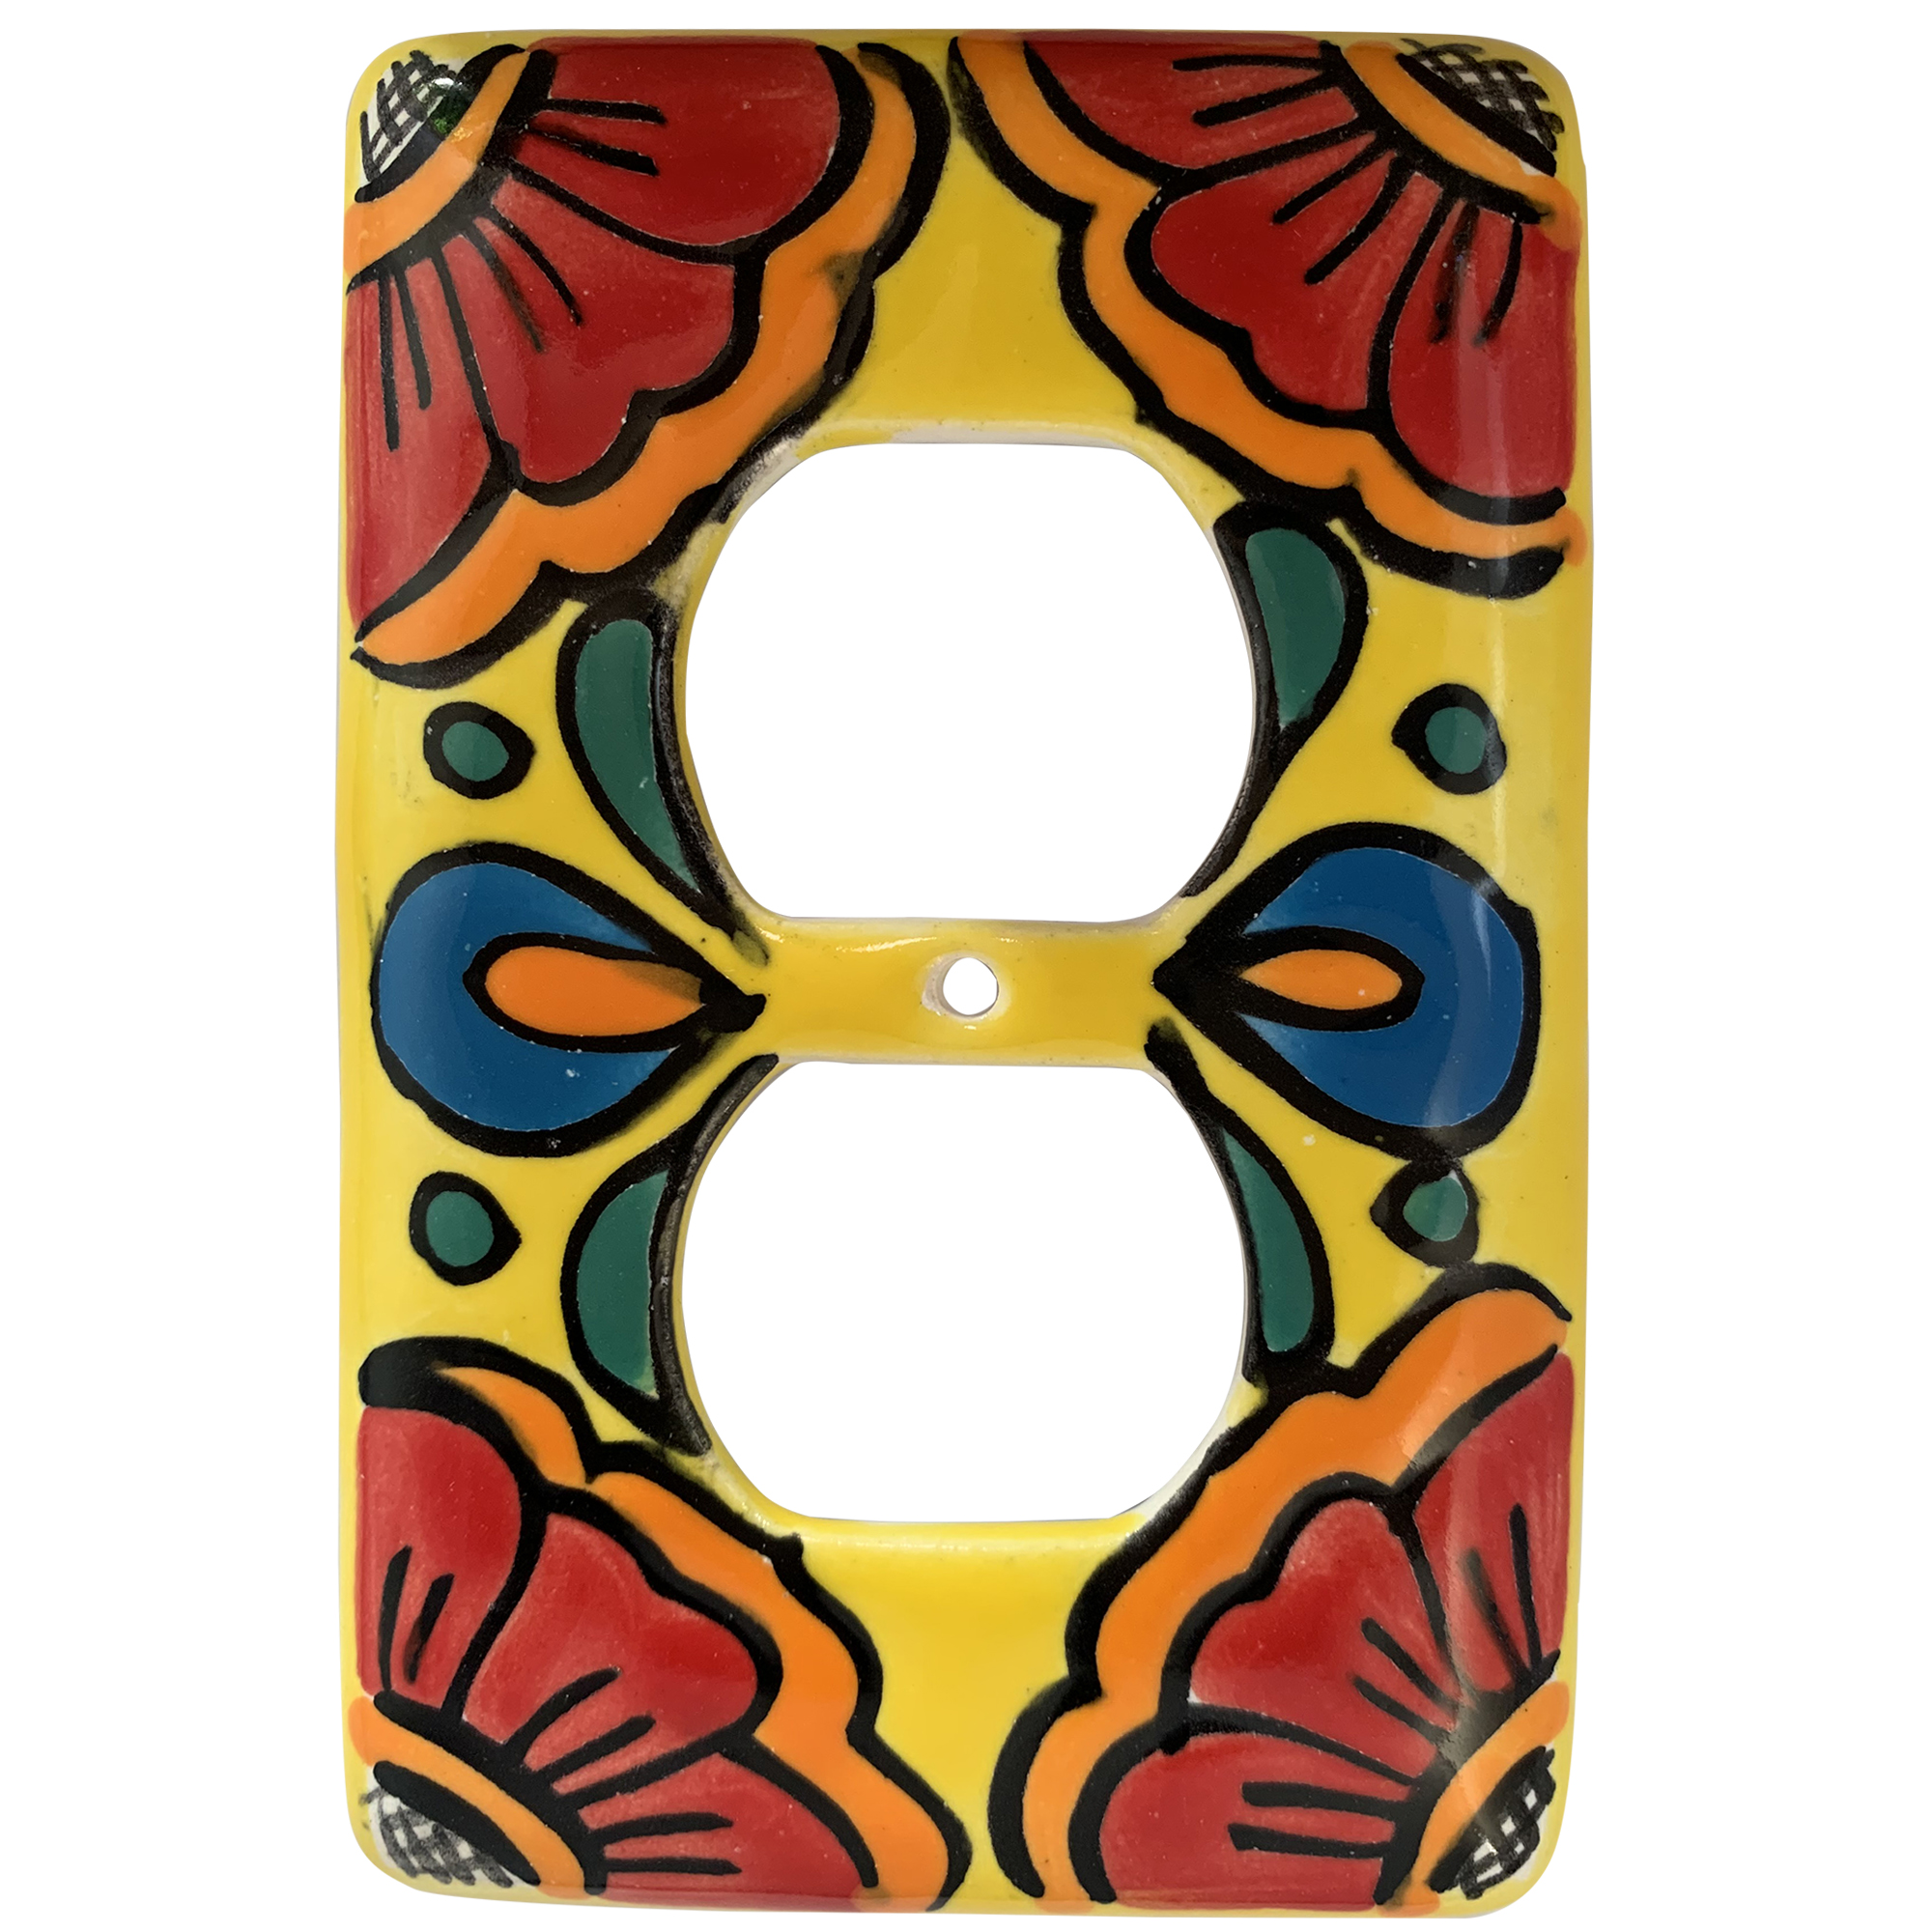 TalaMex Canary Outlet Mexican Talavera Ceramic Switch Plate